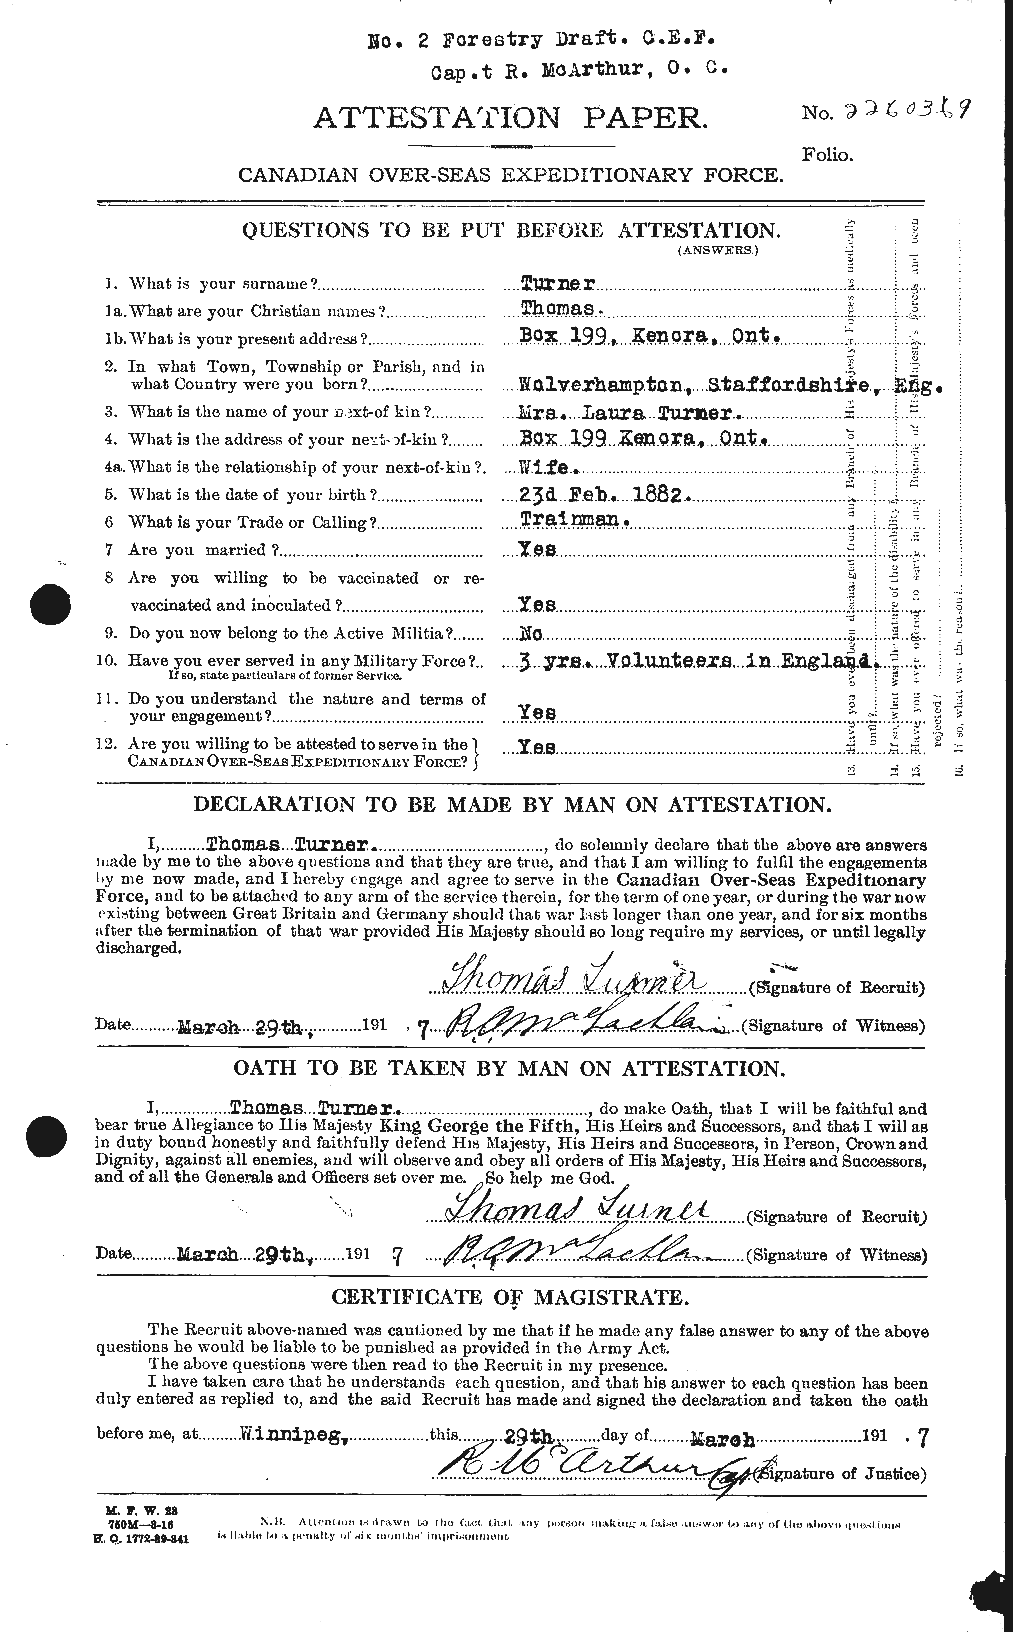 Personnel Records of the First World War - CEF 643897a